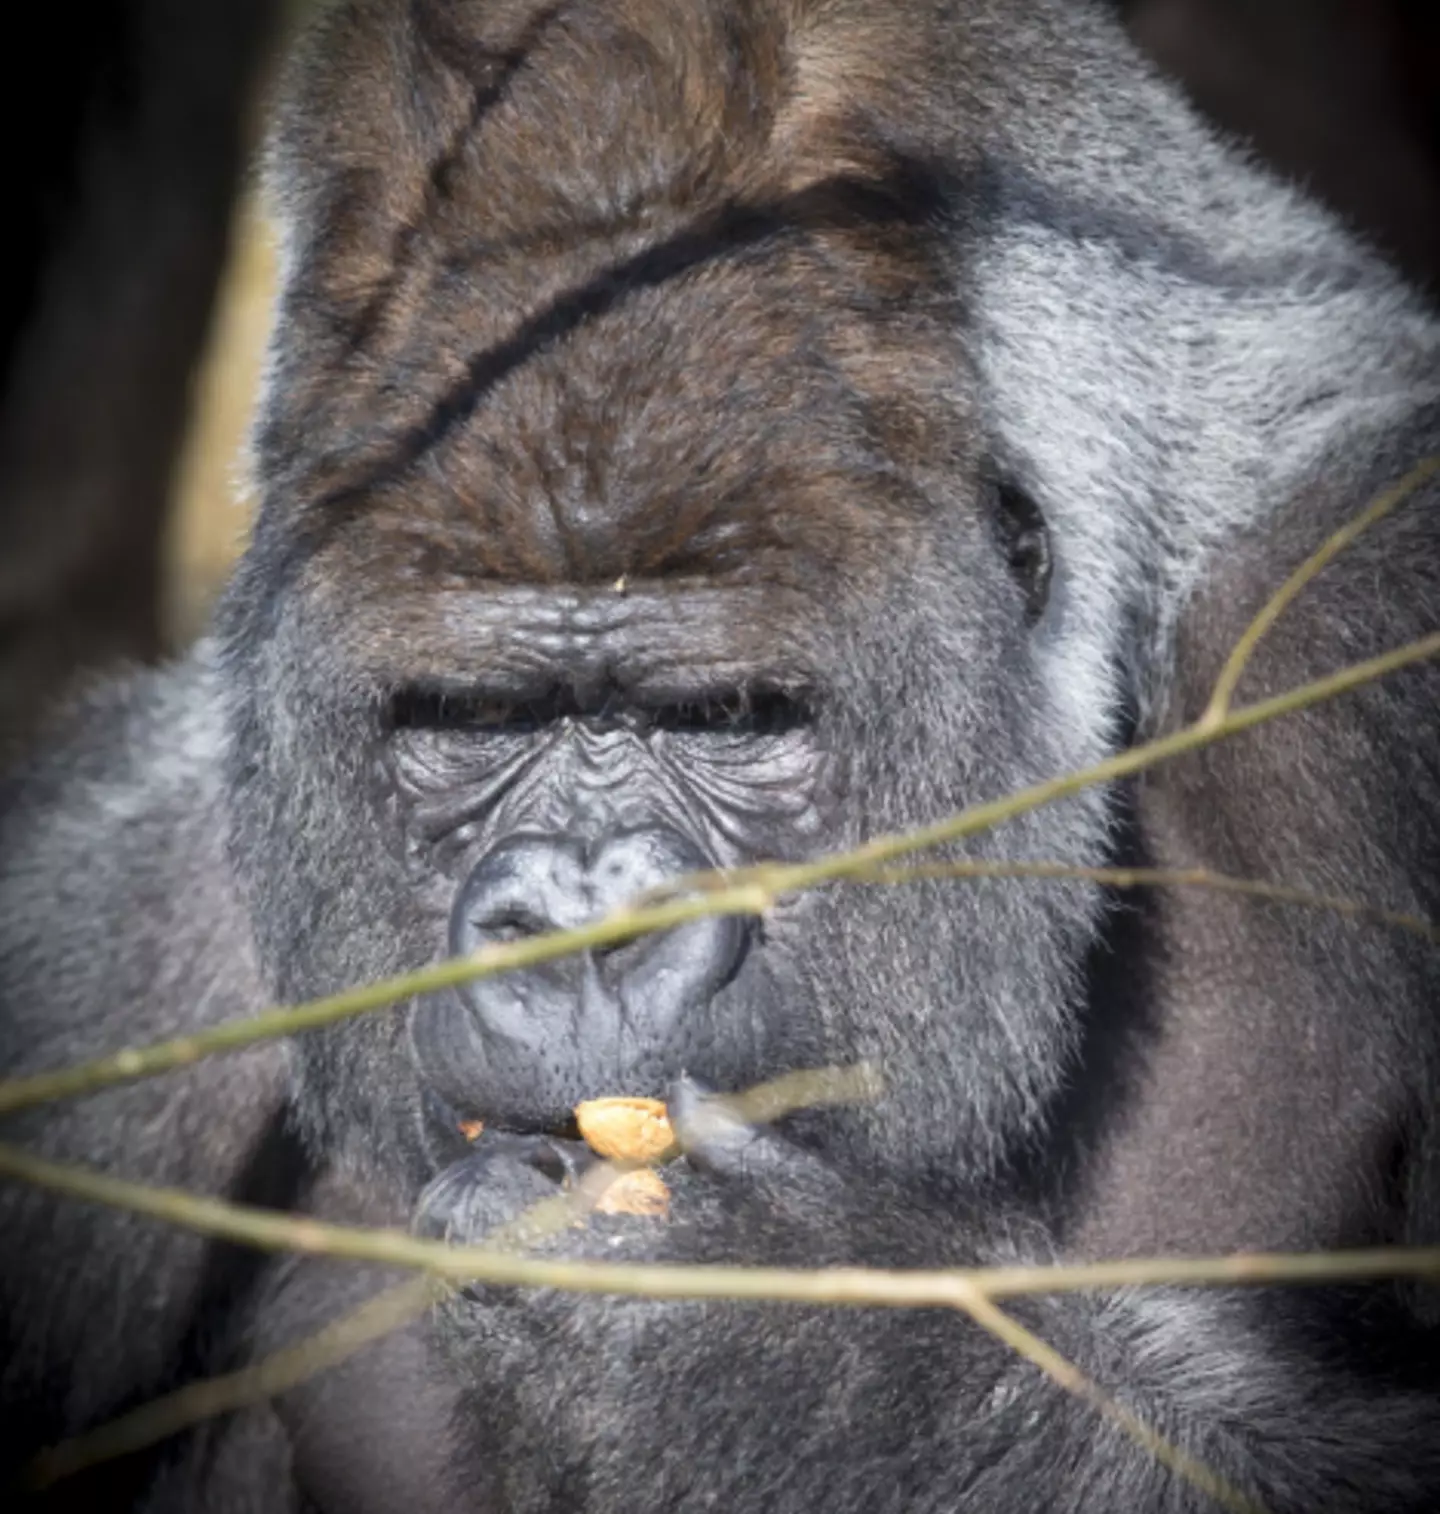 Bokito the gorilla is known for his 2007 escape and attack at a zoo in Rotterdam. (JERRY LAMPEN/AFP/Getty Images)